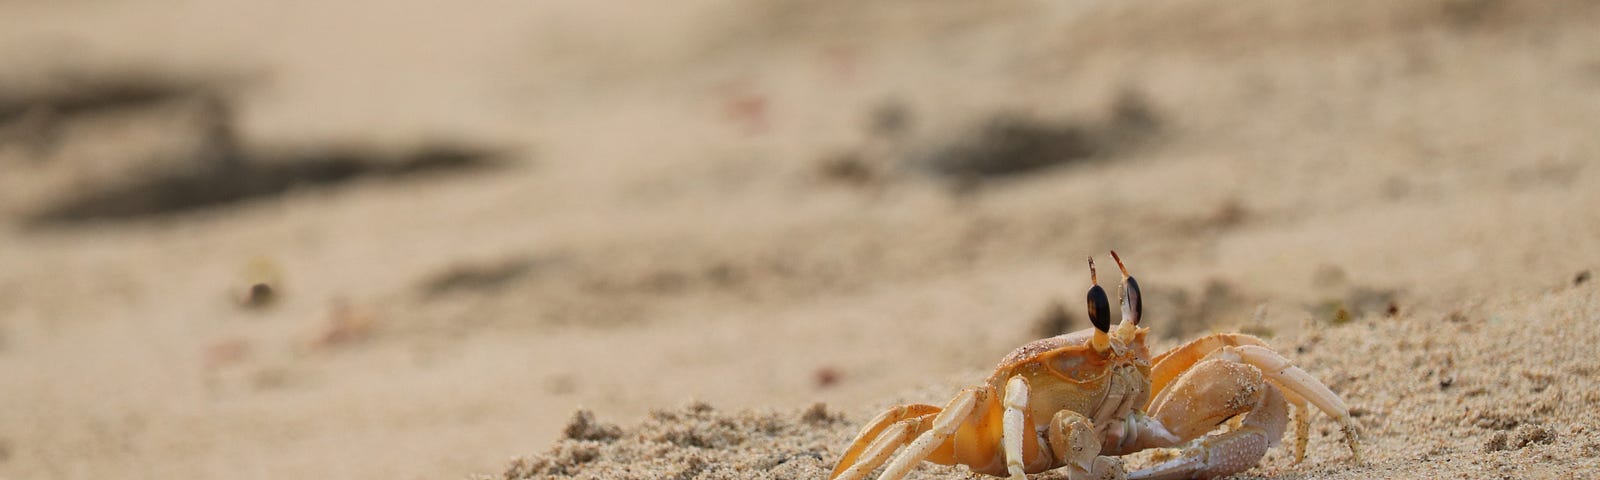 A crab stands on sand, looking off to the right.